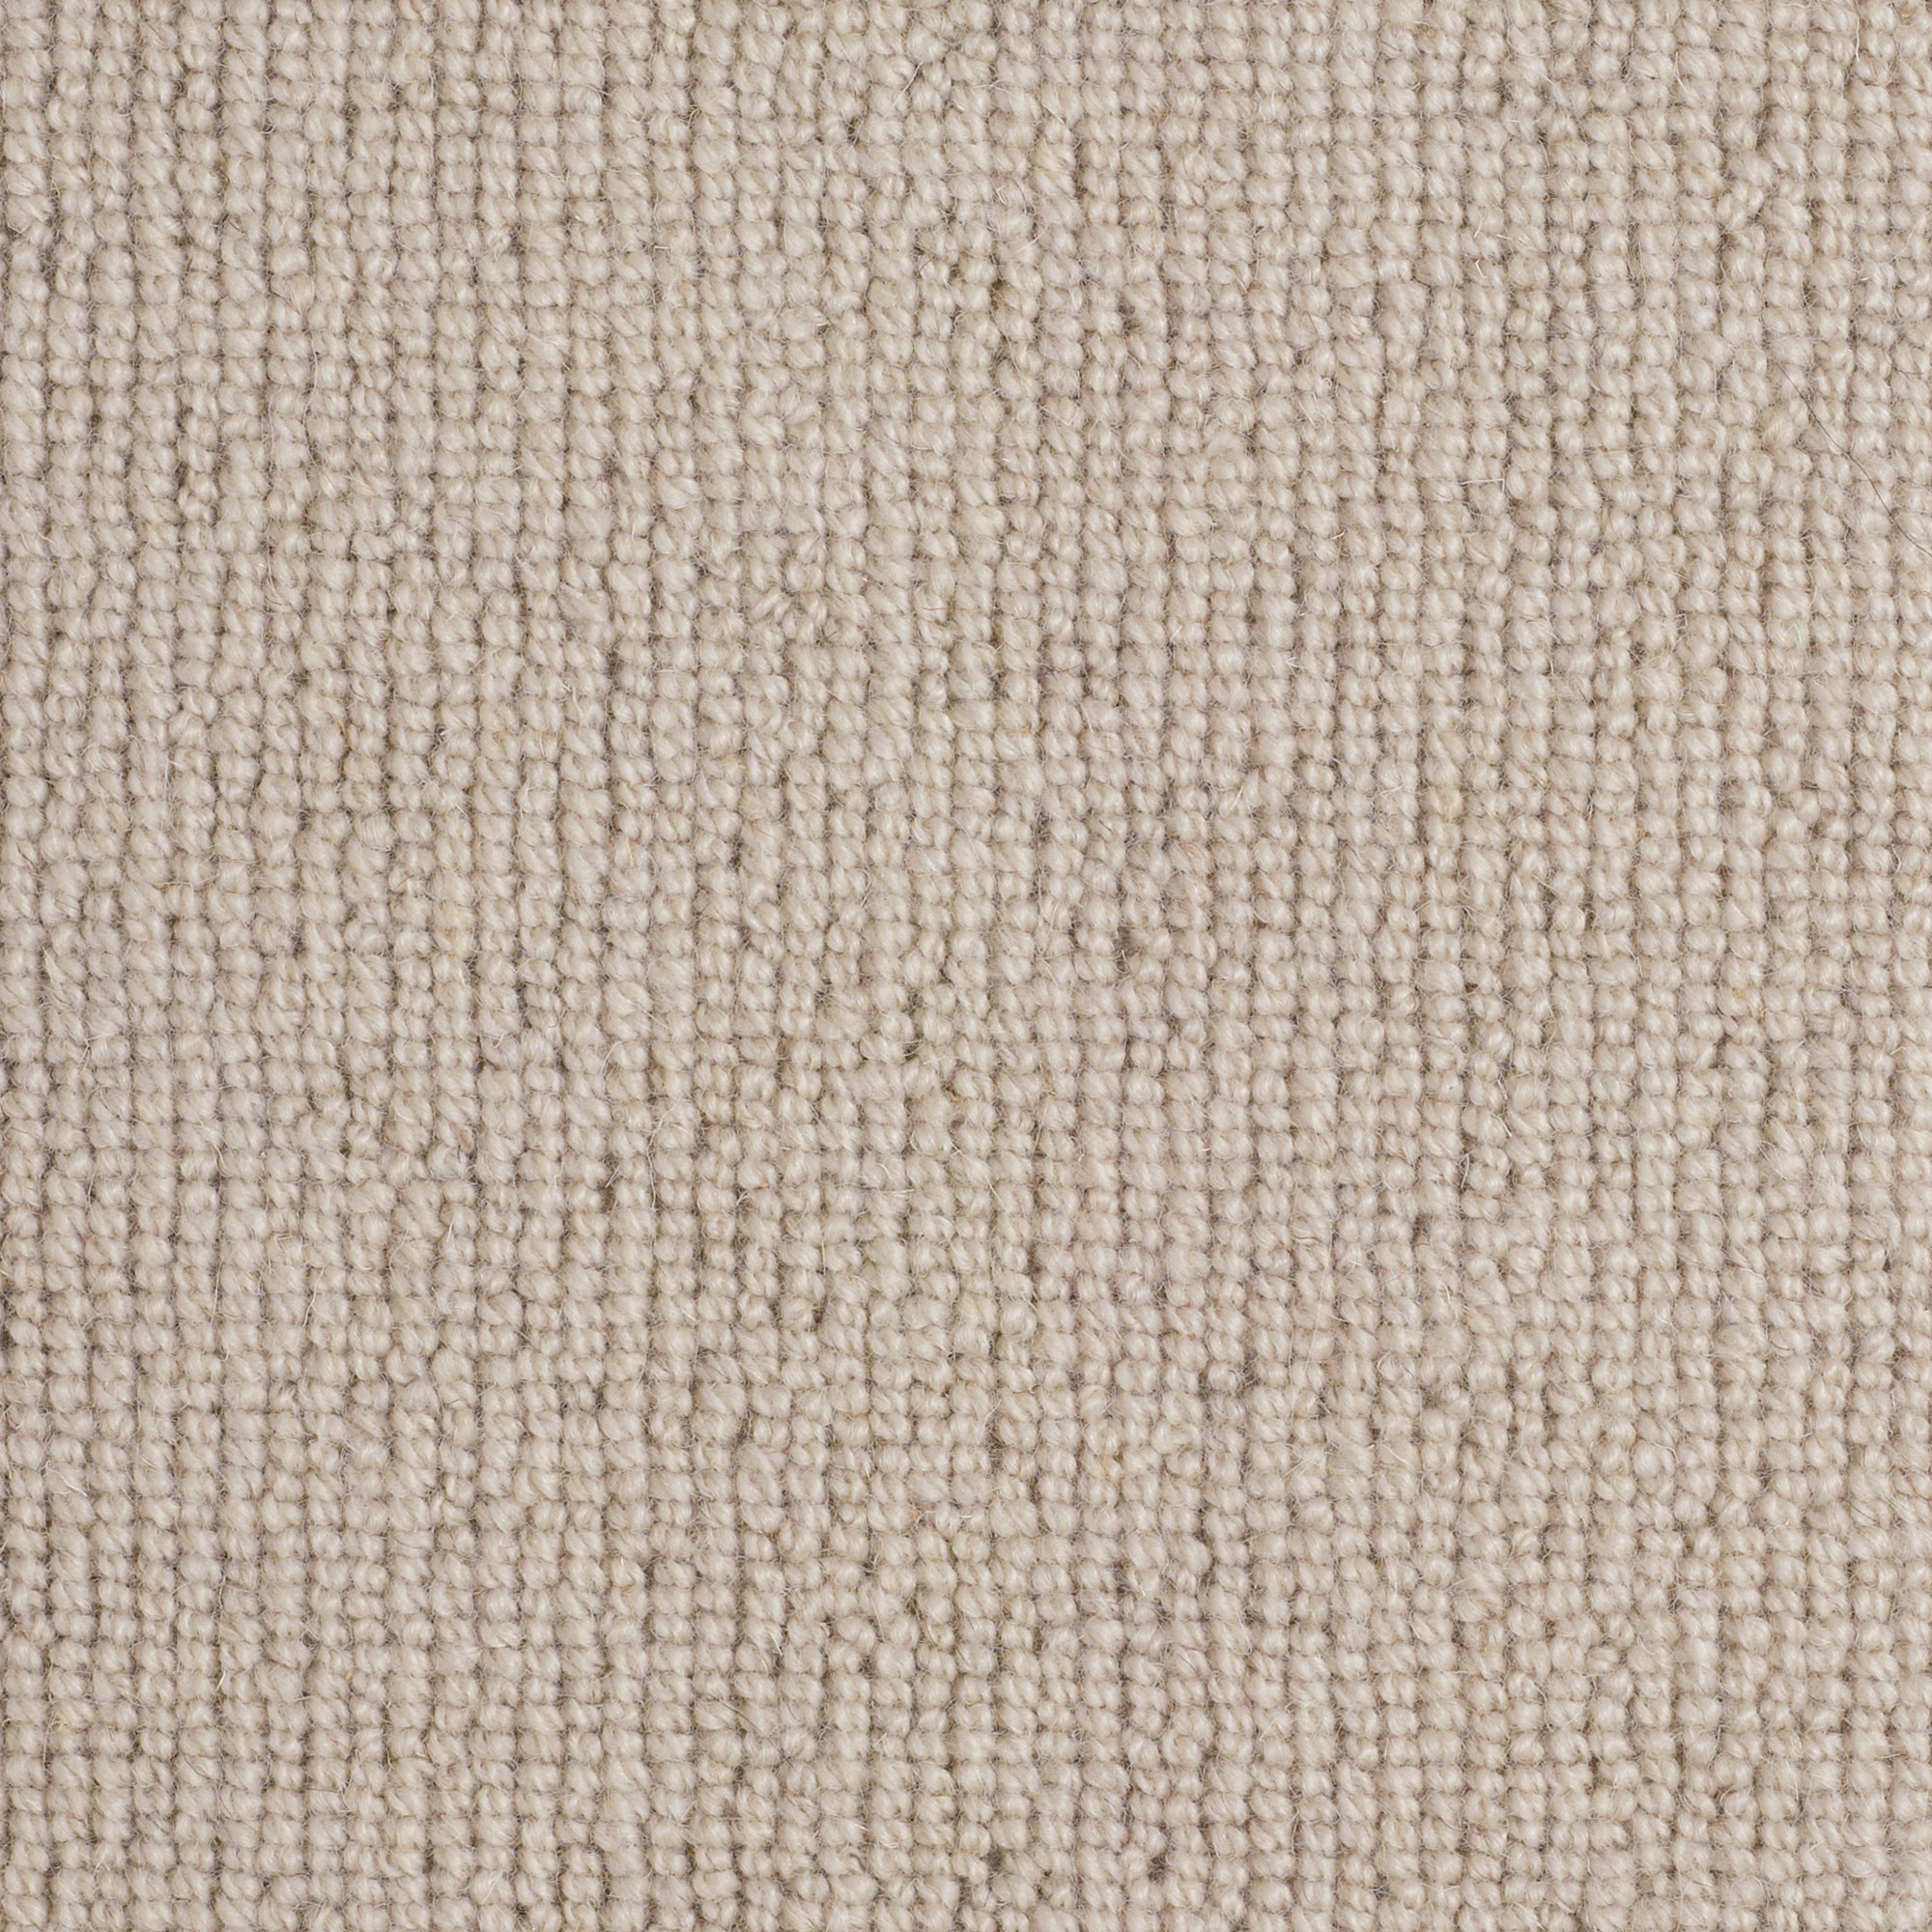 Scafell: Threshed Wheat - 100% Wool Carpet